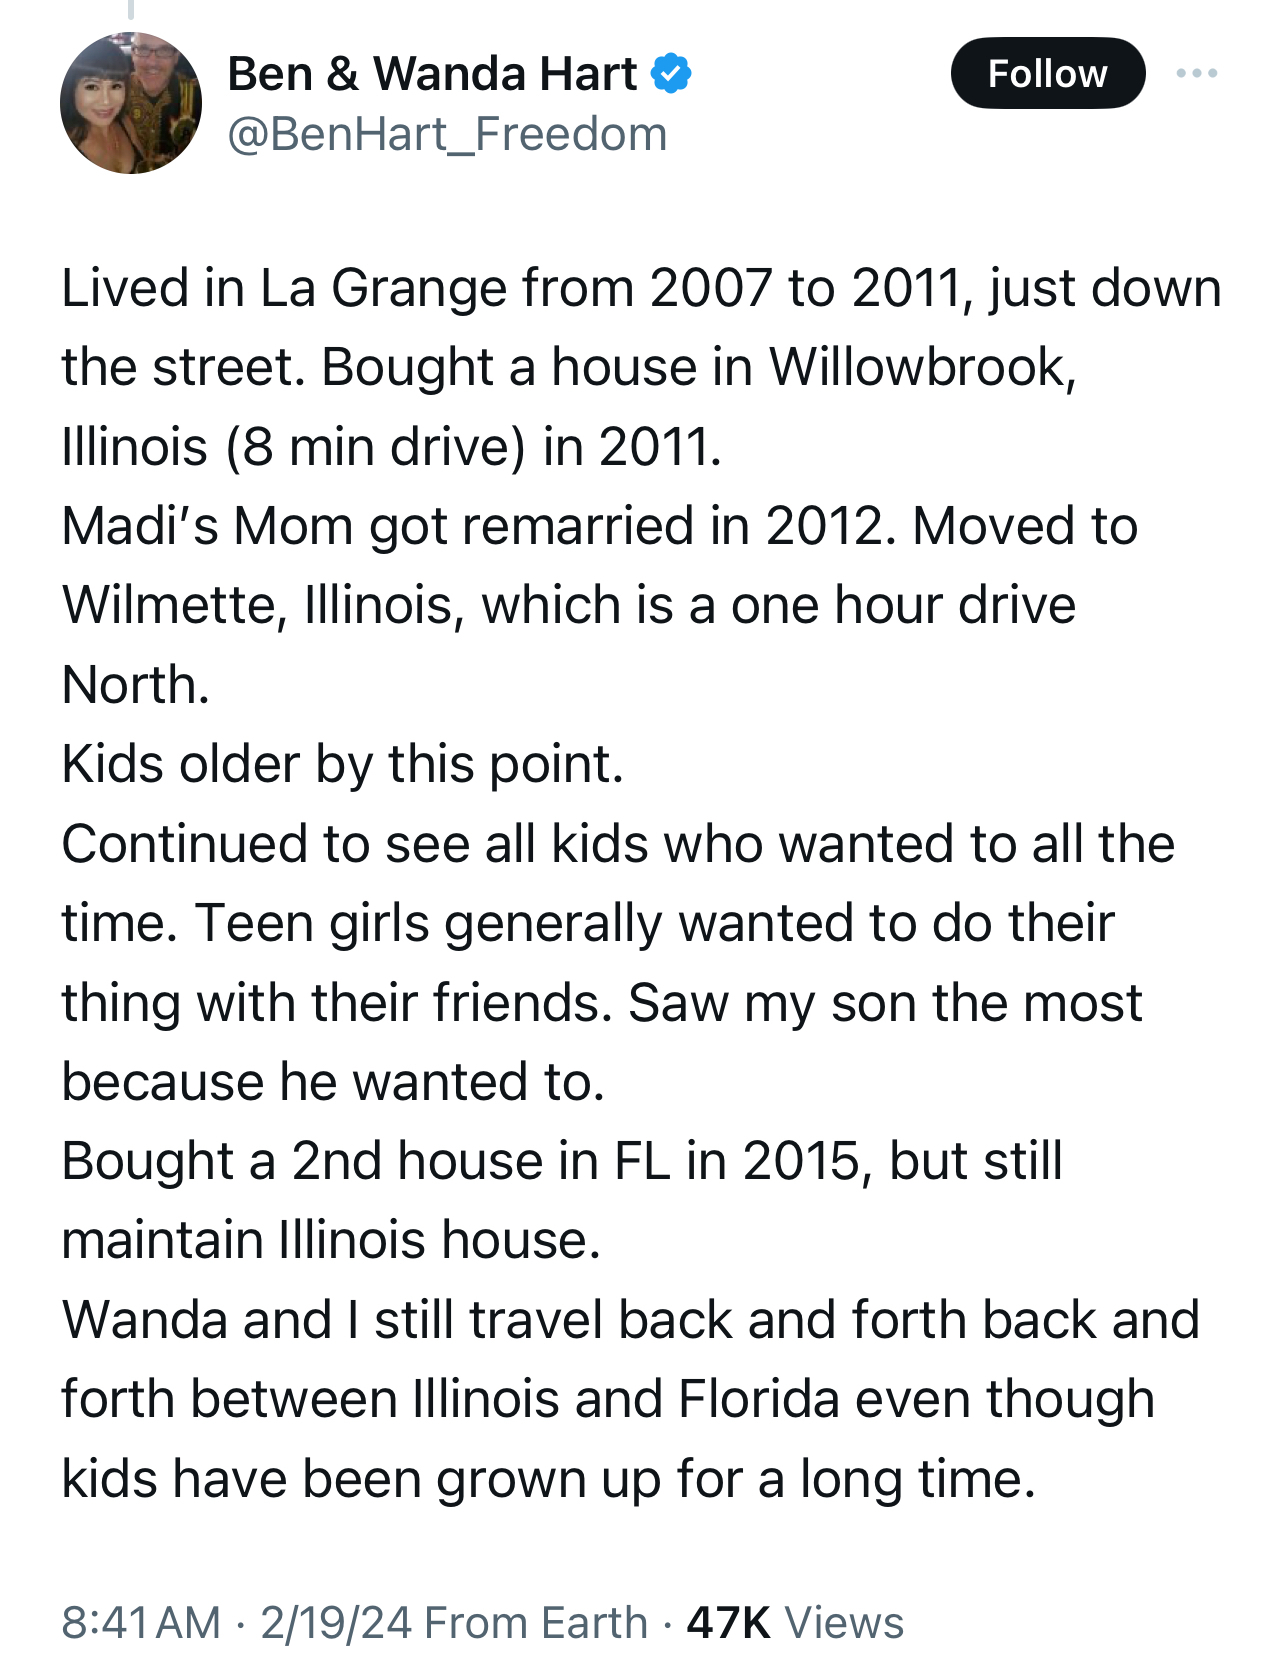 Text summary: Ben Hart&#x27;s life journey from 2007 to 2021, detailing residential moves, kids growing up, and traveling between Illinois and Florida